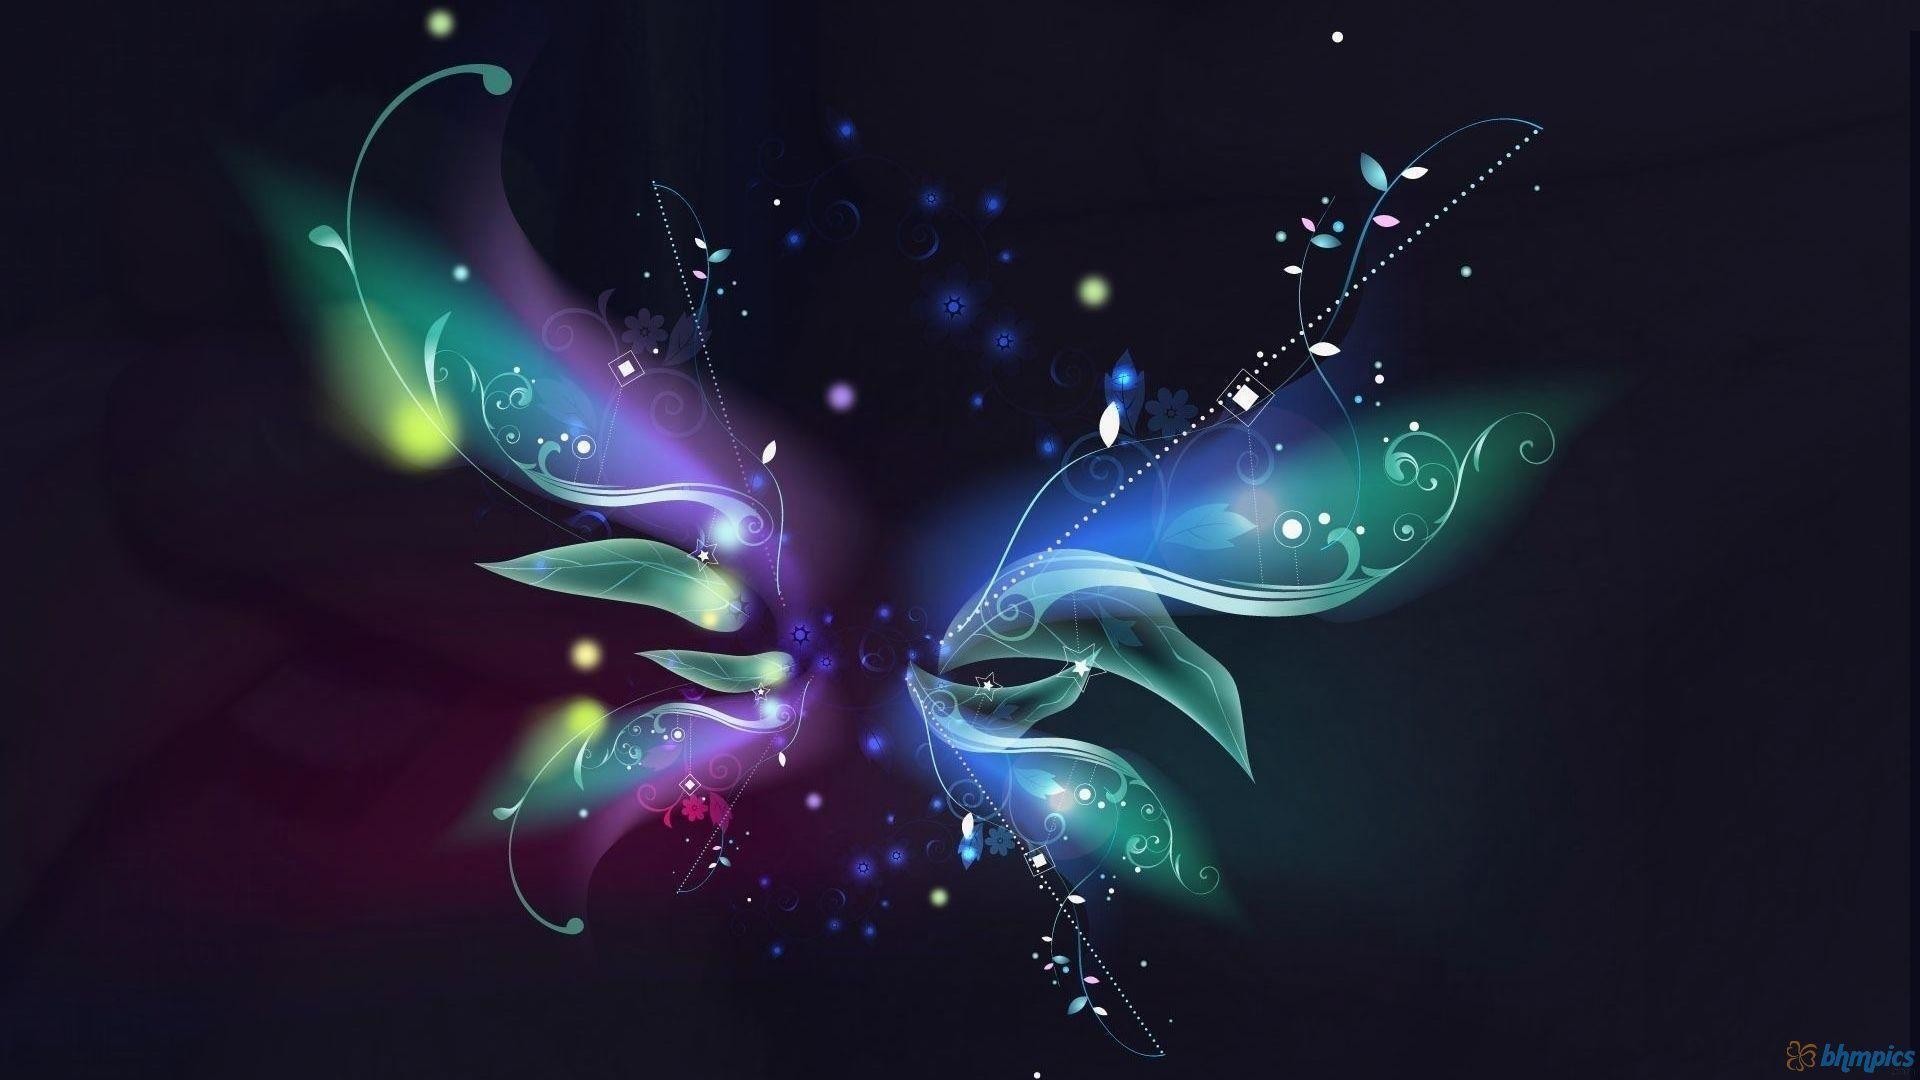 1920x1080 Butterfly Abstract Windows 8.1 Theme | Windows 8.1 Themes .